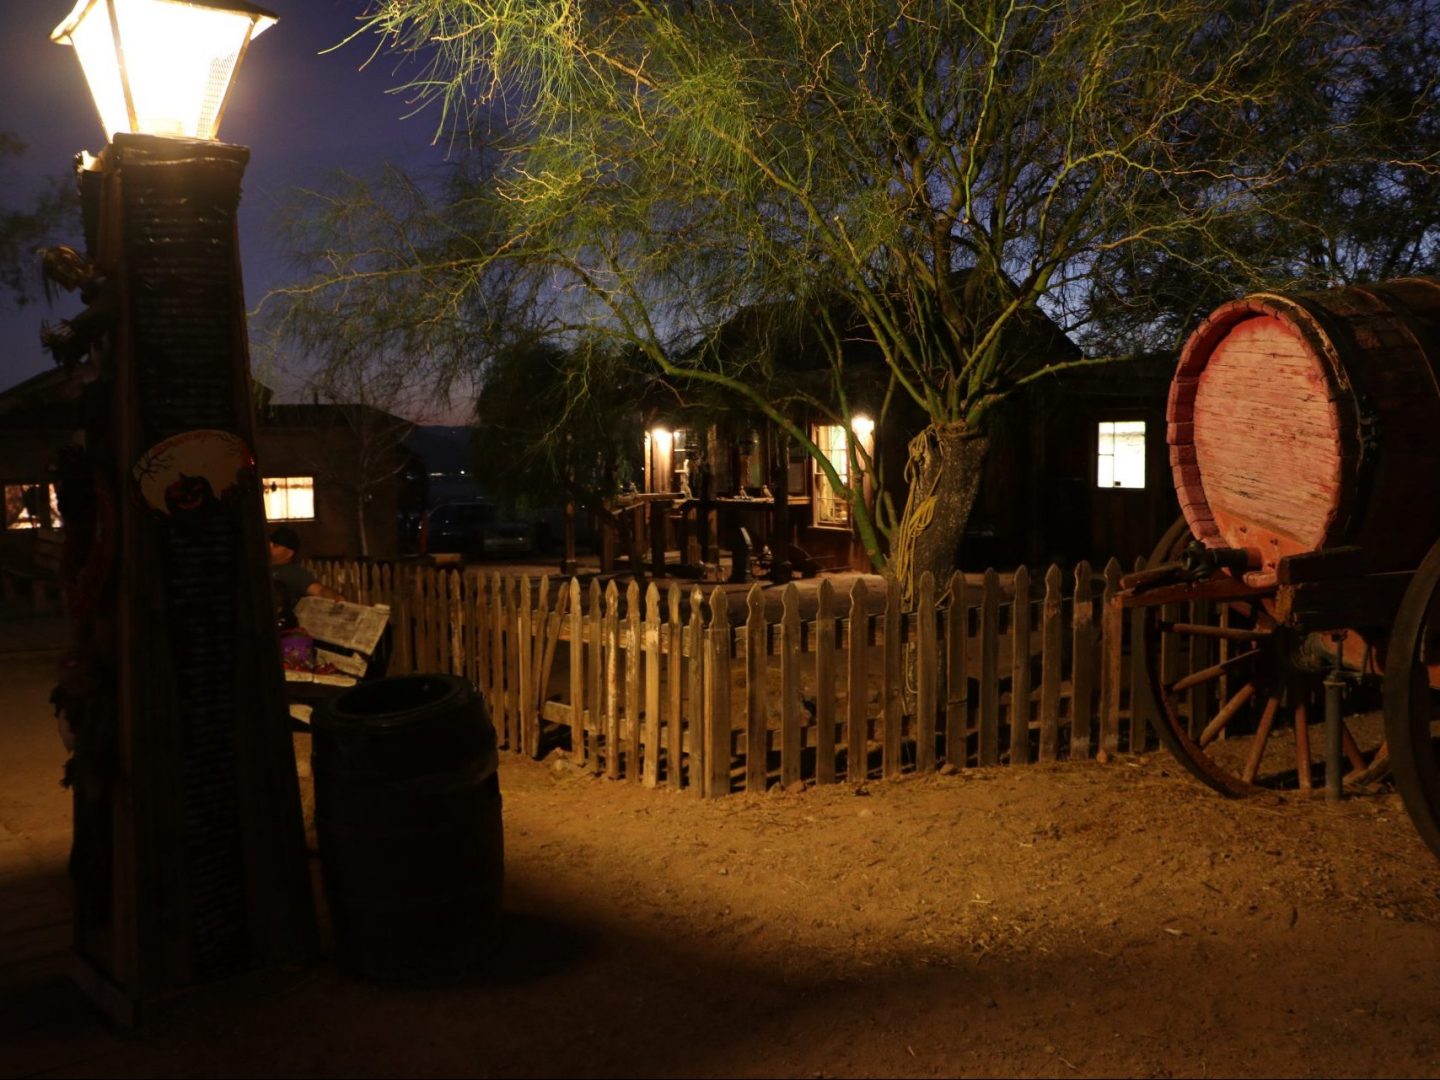 calico ghost town halloween 2020 Calico Ghost Haunt Parks calico ghost town halloween 2020